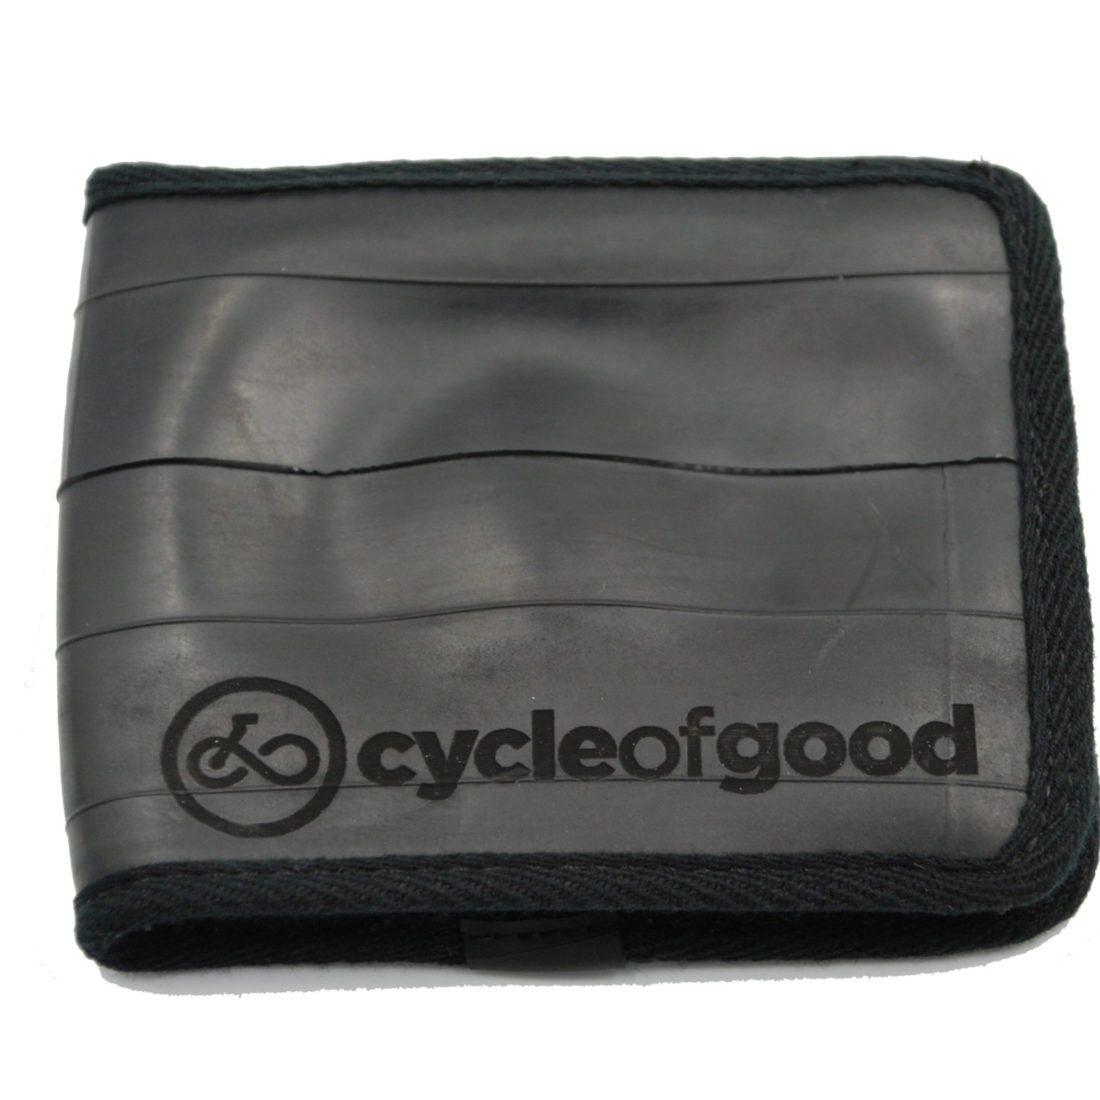 Cycle of good wallet